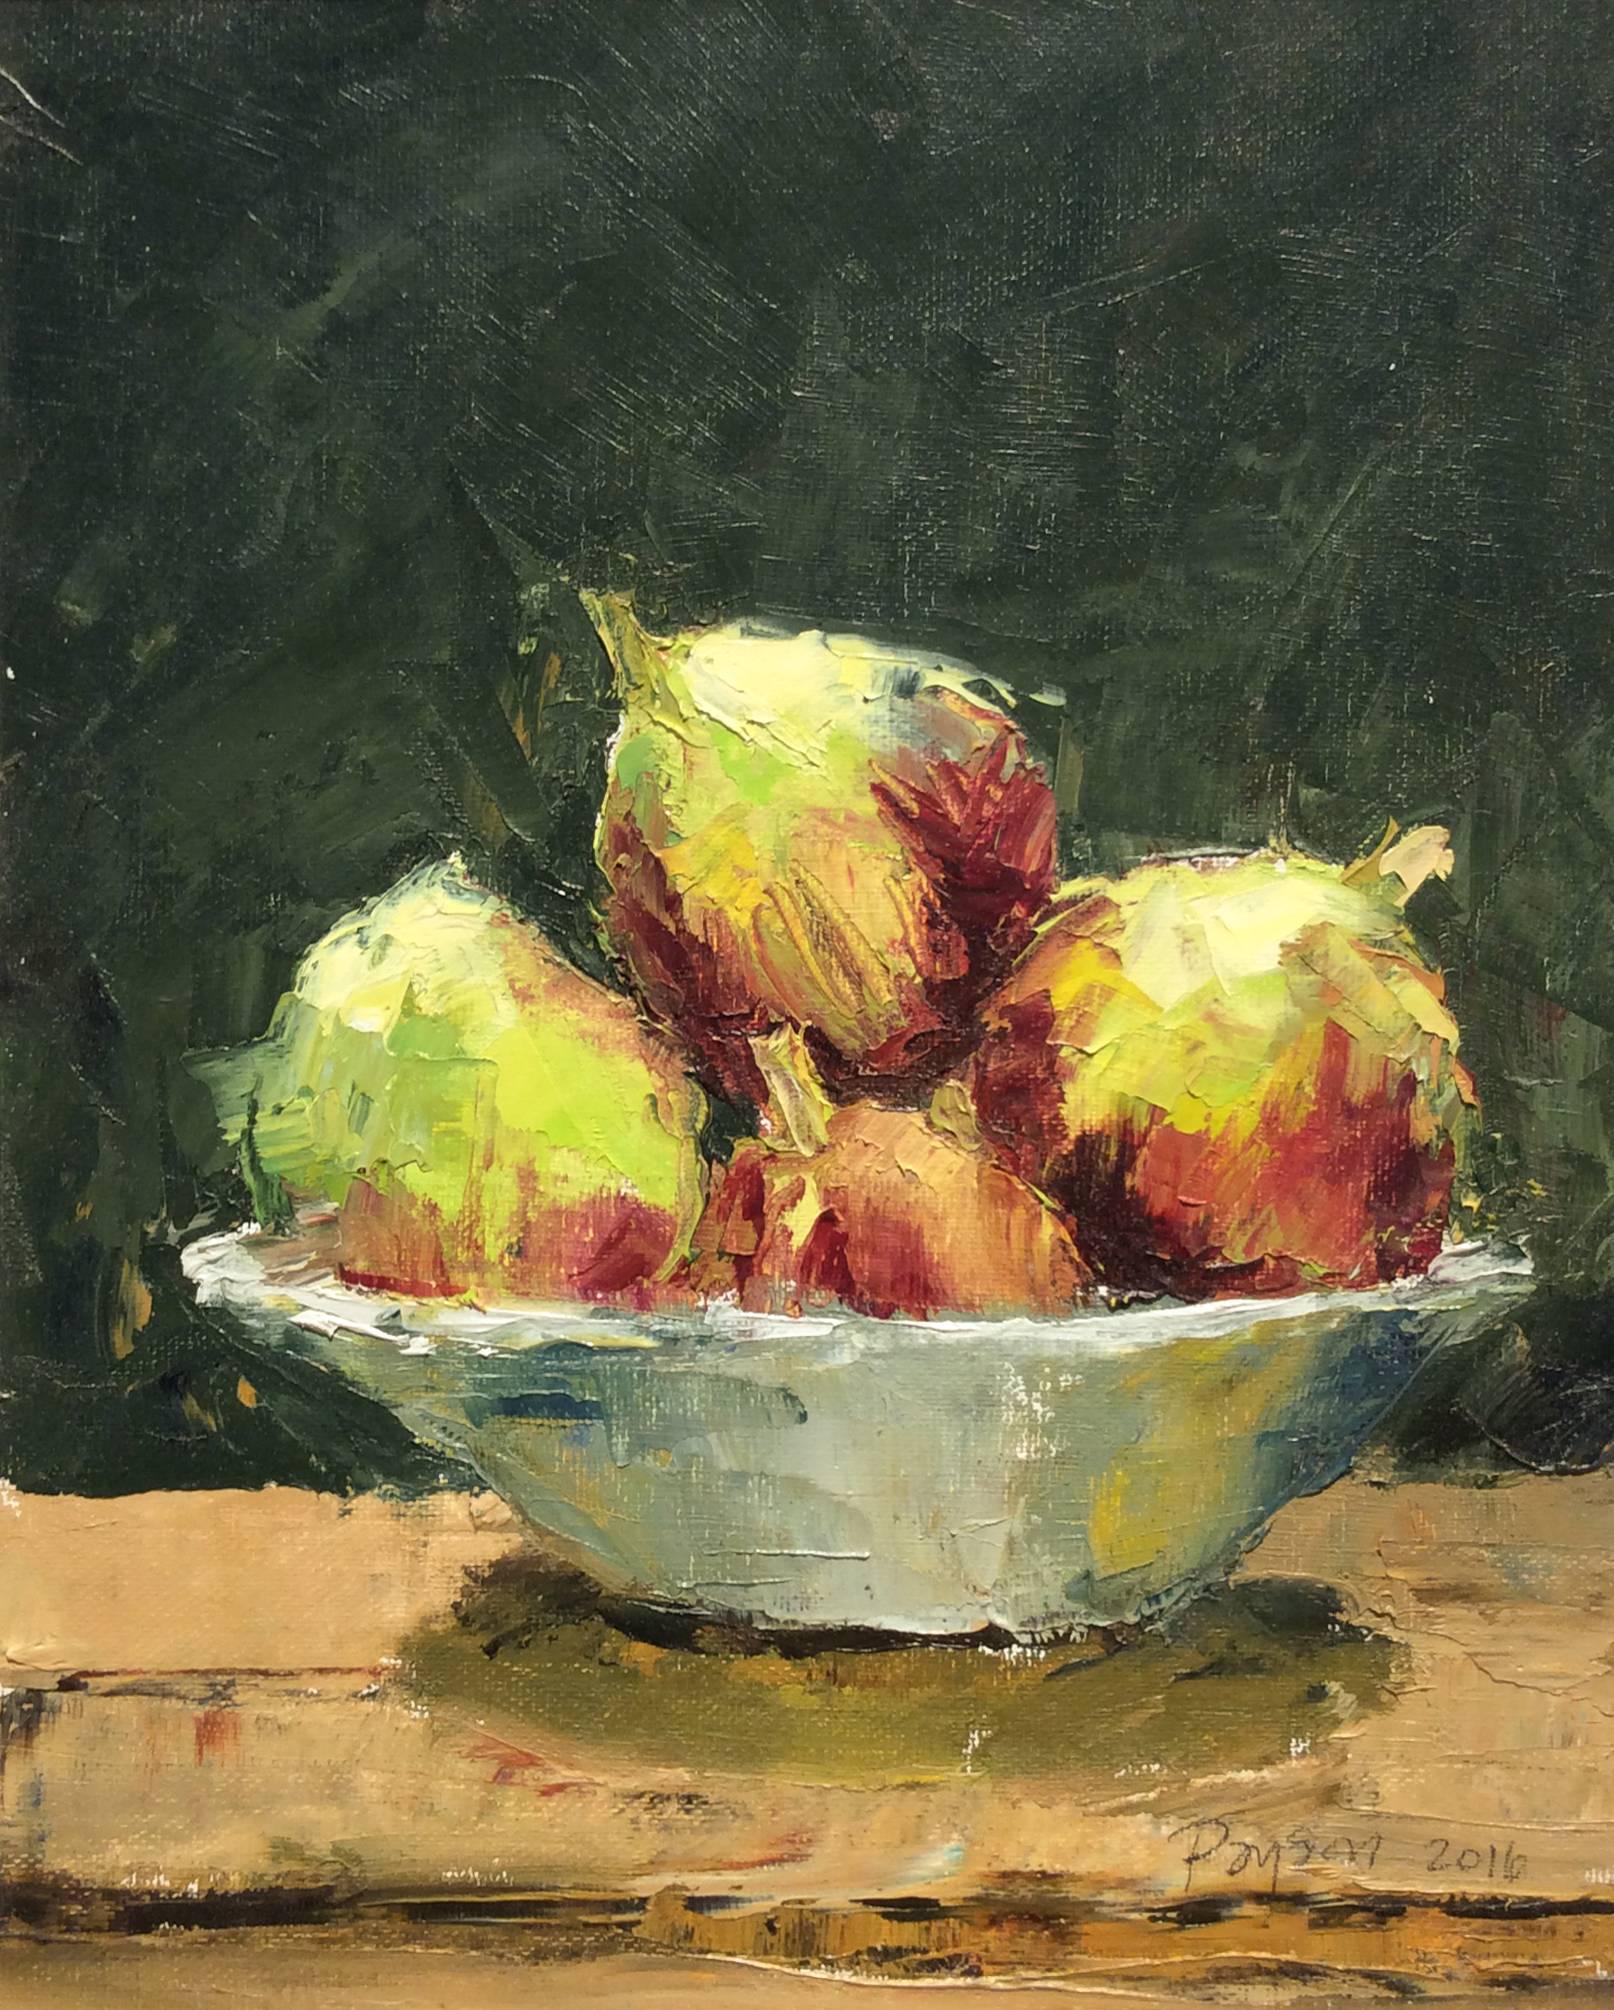 Bowl of Figs (Small Fruit Still Life Painting of Red & Green Figs in Wood Frame) - Brown Still-Life Painting by Dale Payson